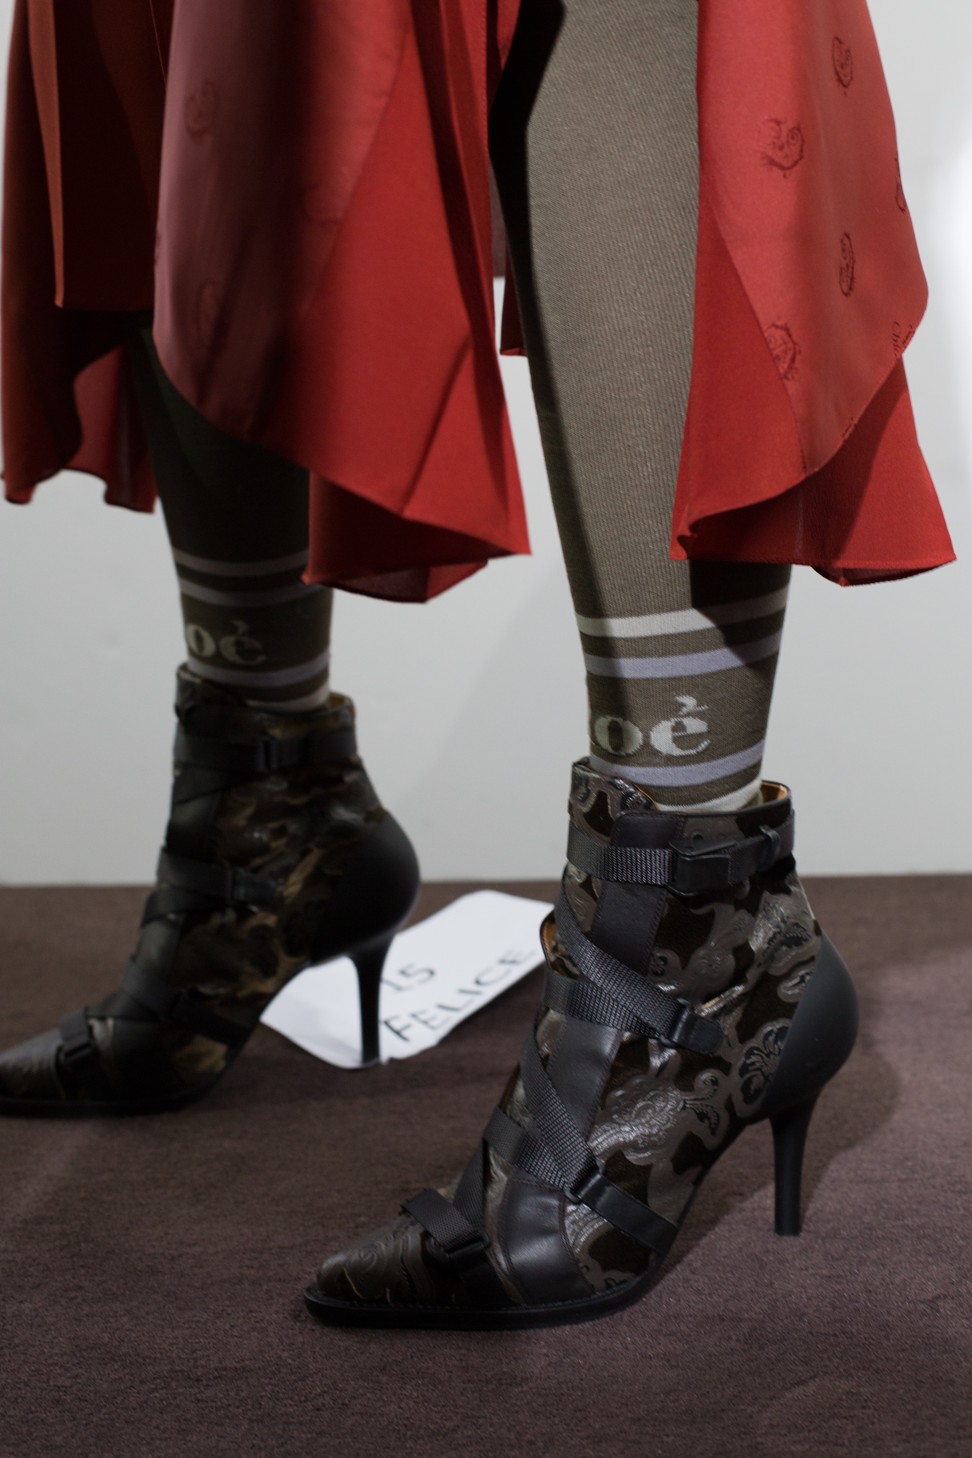 The pointed-toe stiletto booties in the autumn/winter 2018 collection is a signature design of Natacha Ramsay-Levi